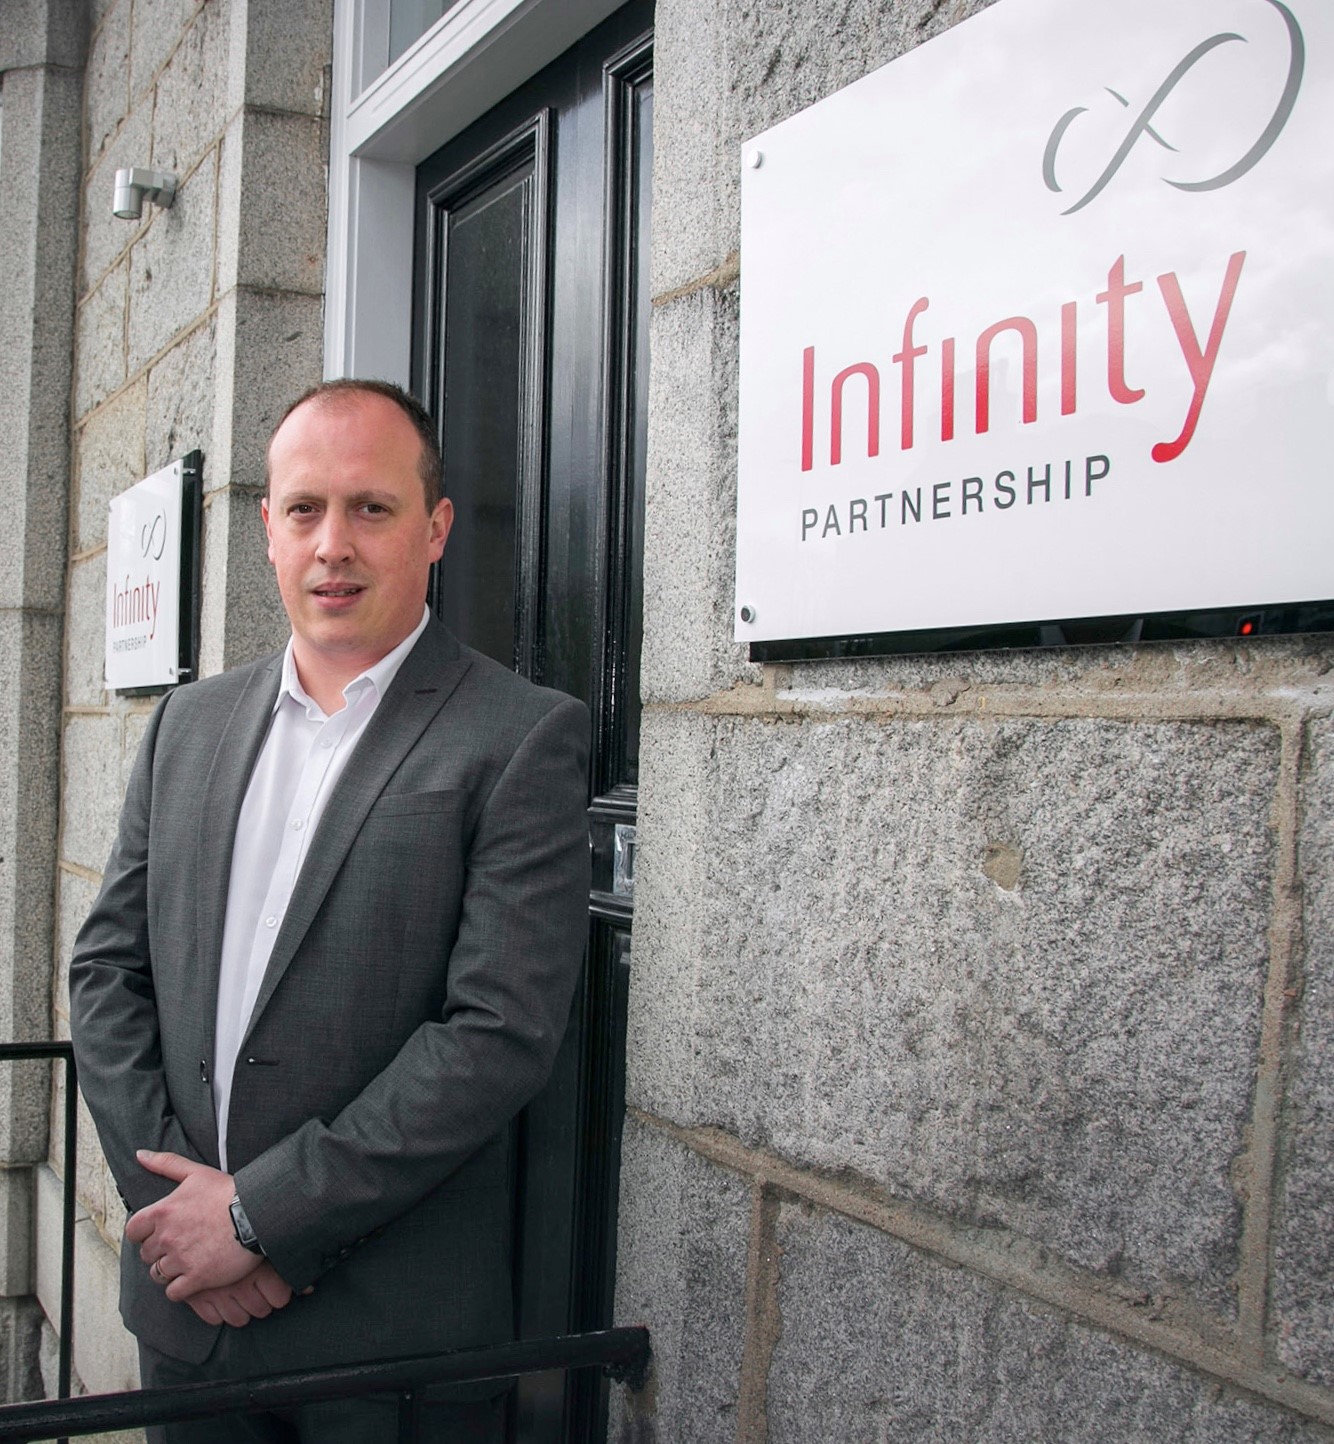 Infinity Partnership joins forces with Starling Bank